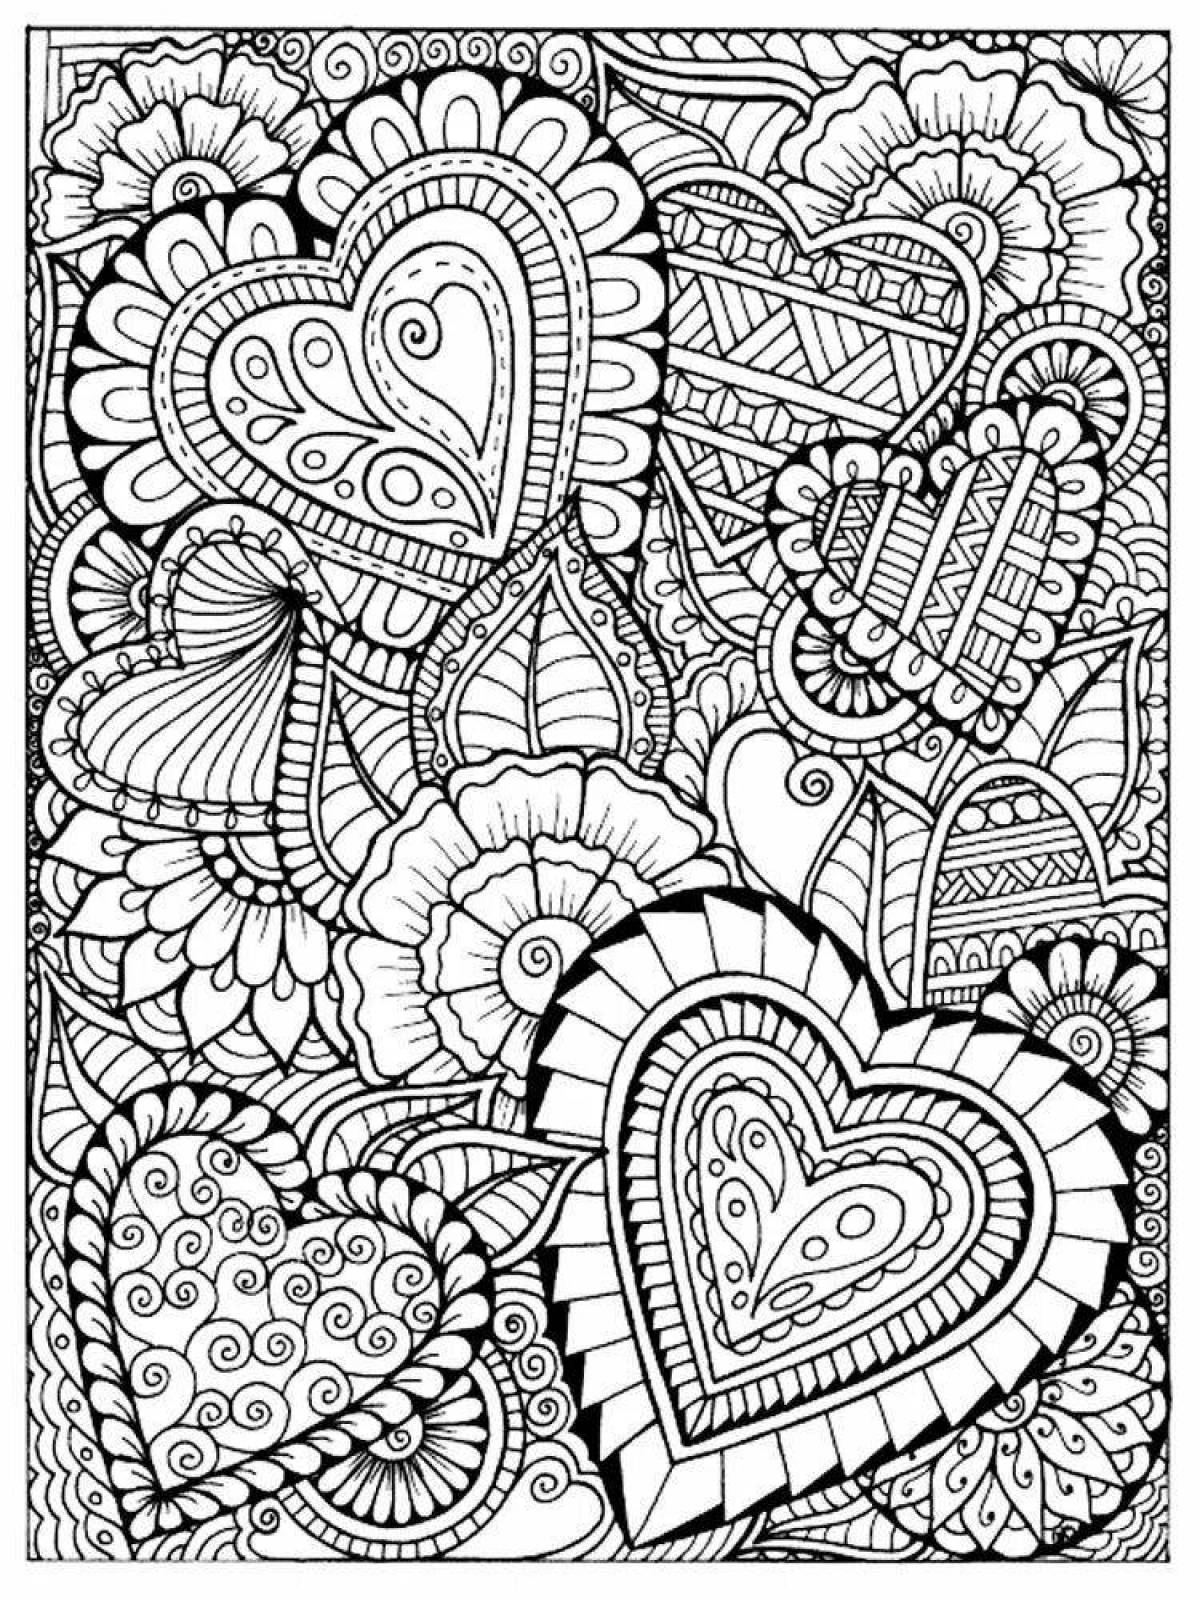 A nice anti-stress coloring book for adults